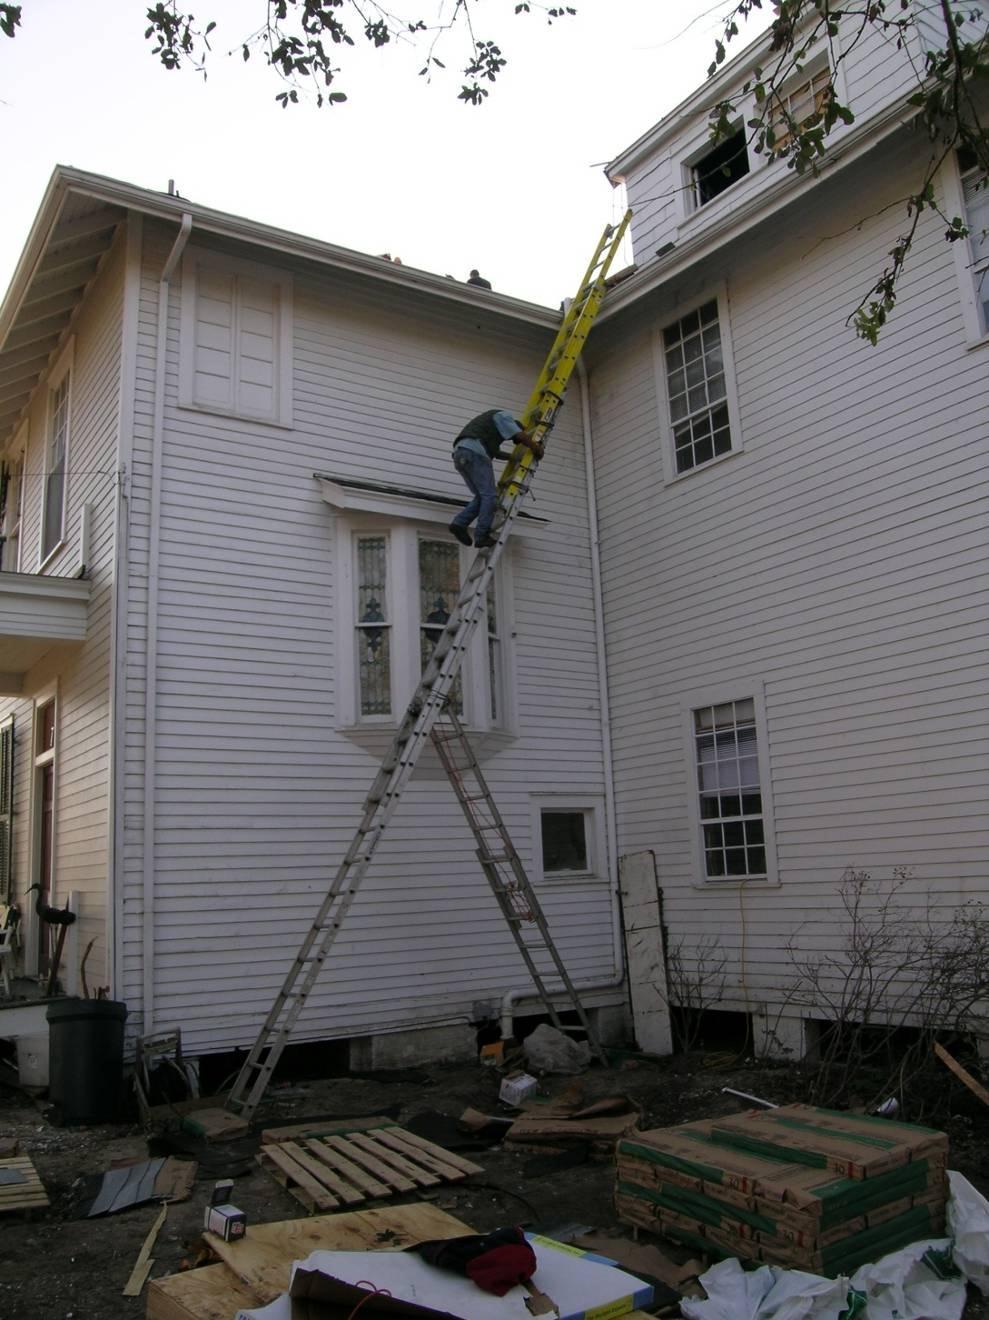 This is the incorrect way to use extension ladders.